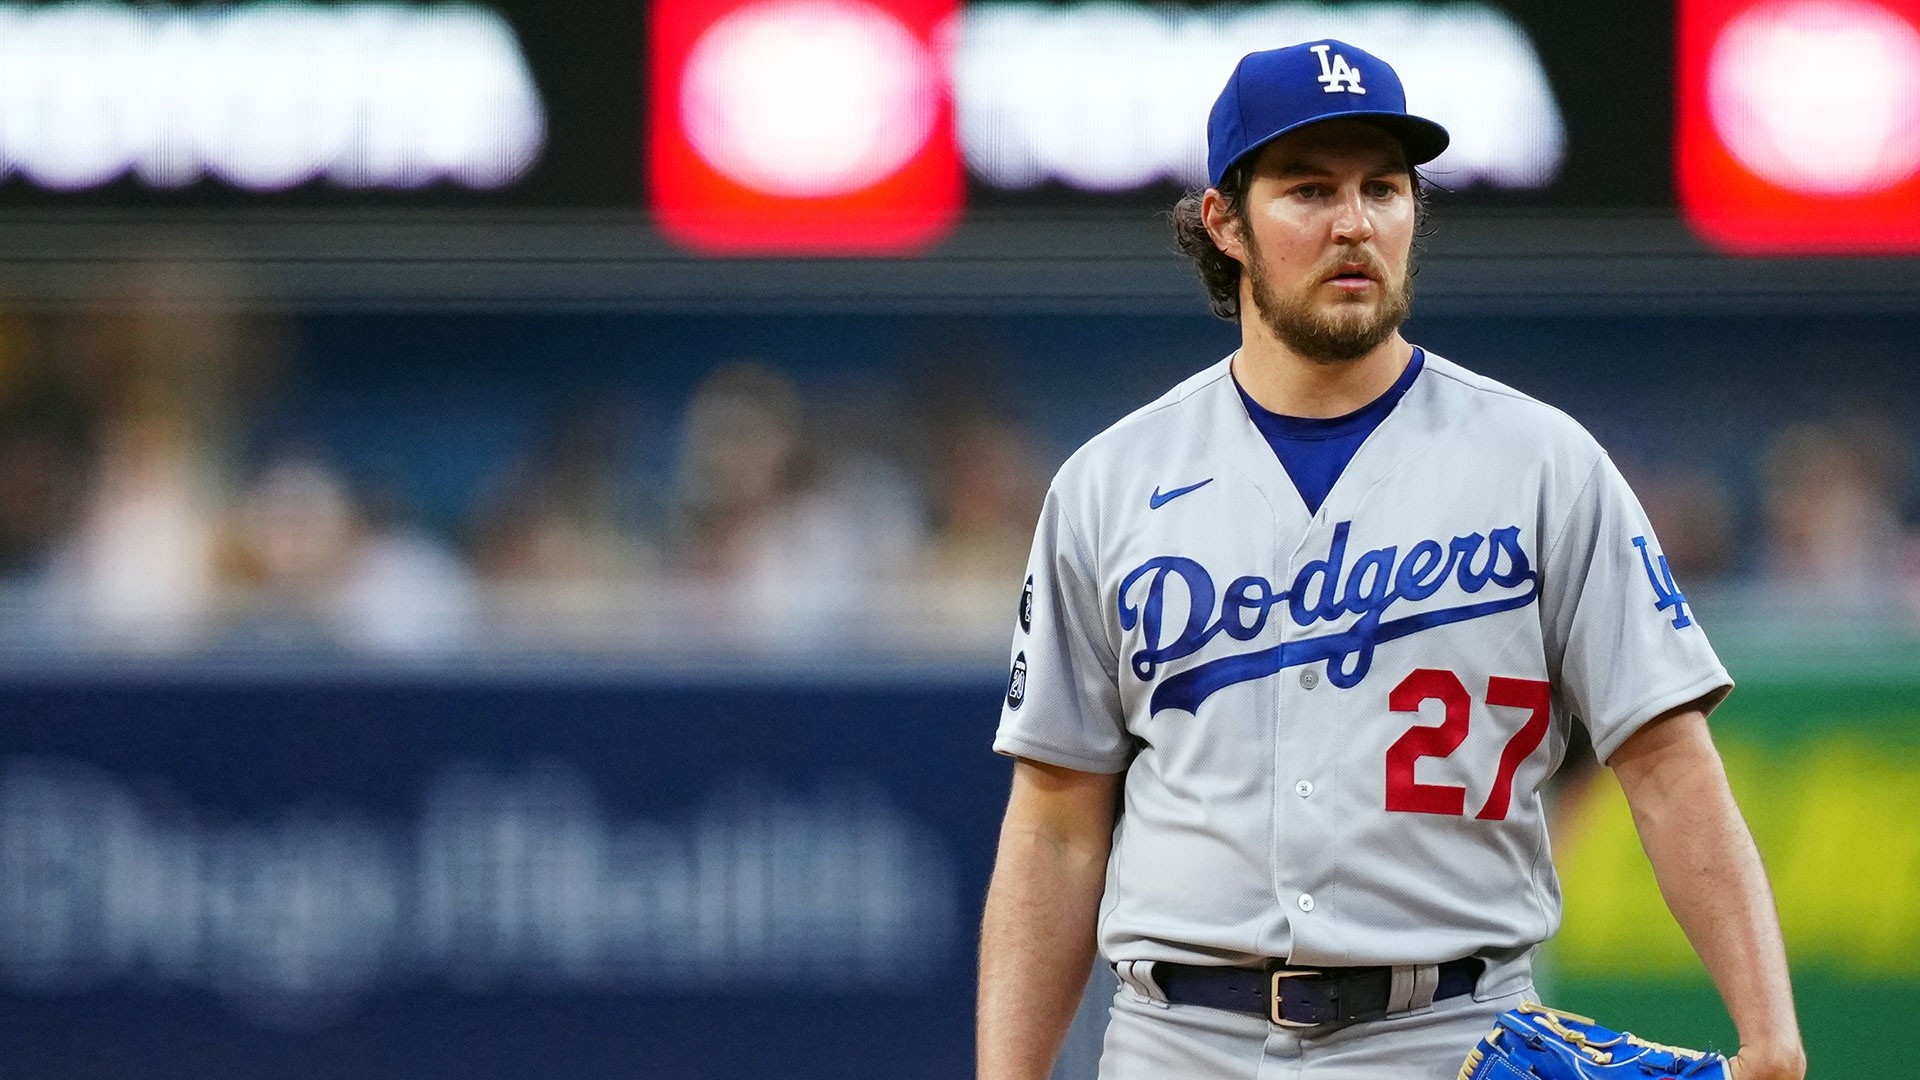 Los Angeles Dodgers pitcher Trevor Bauer suspended for 2 years